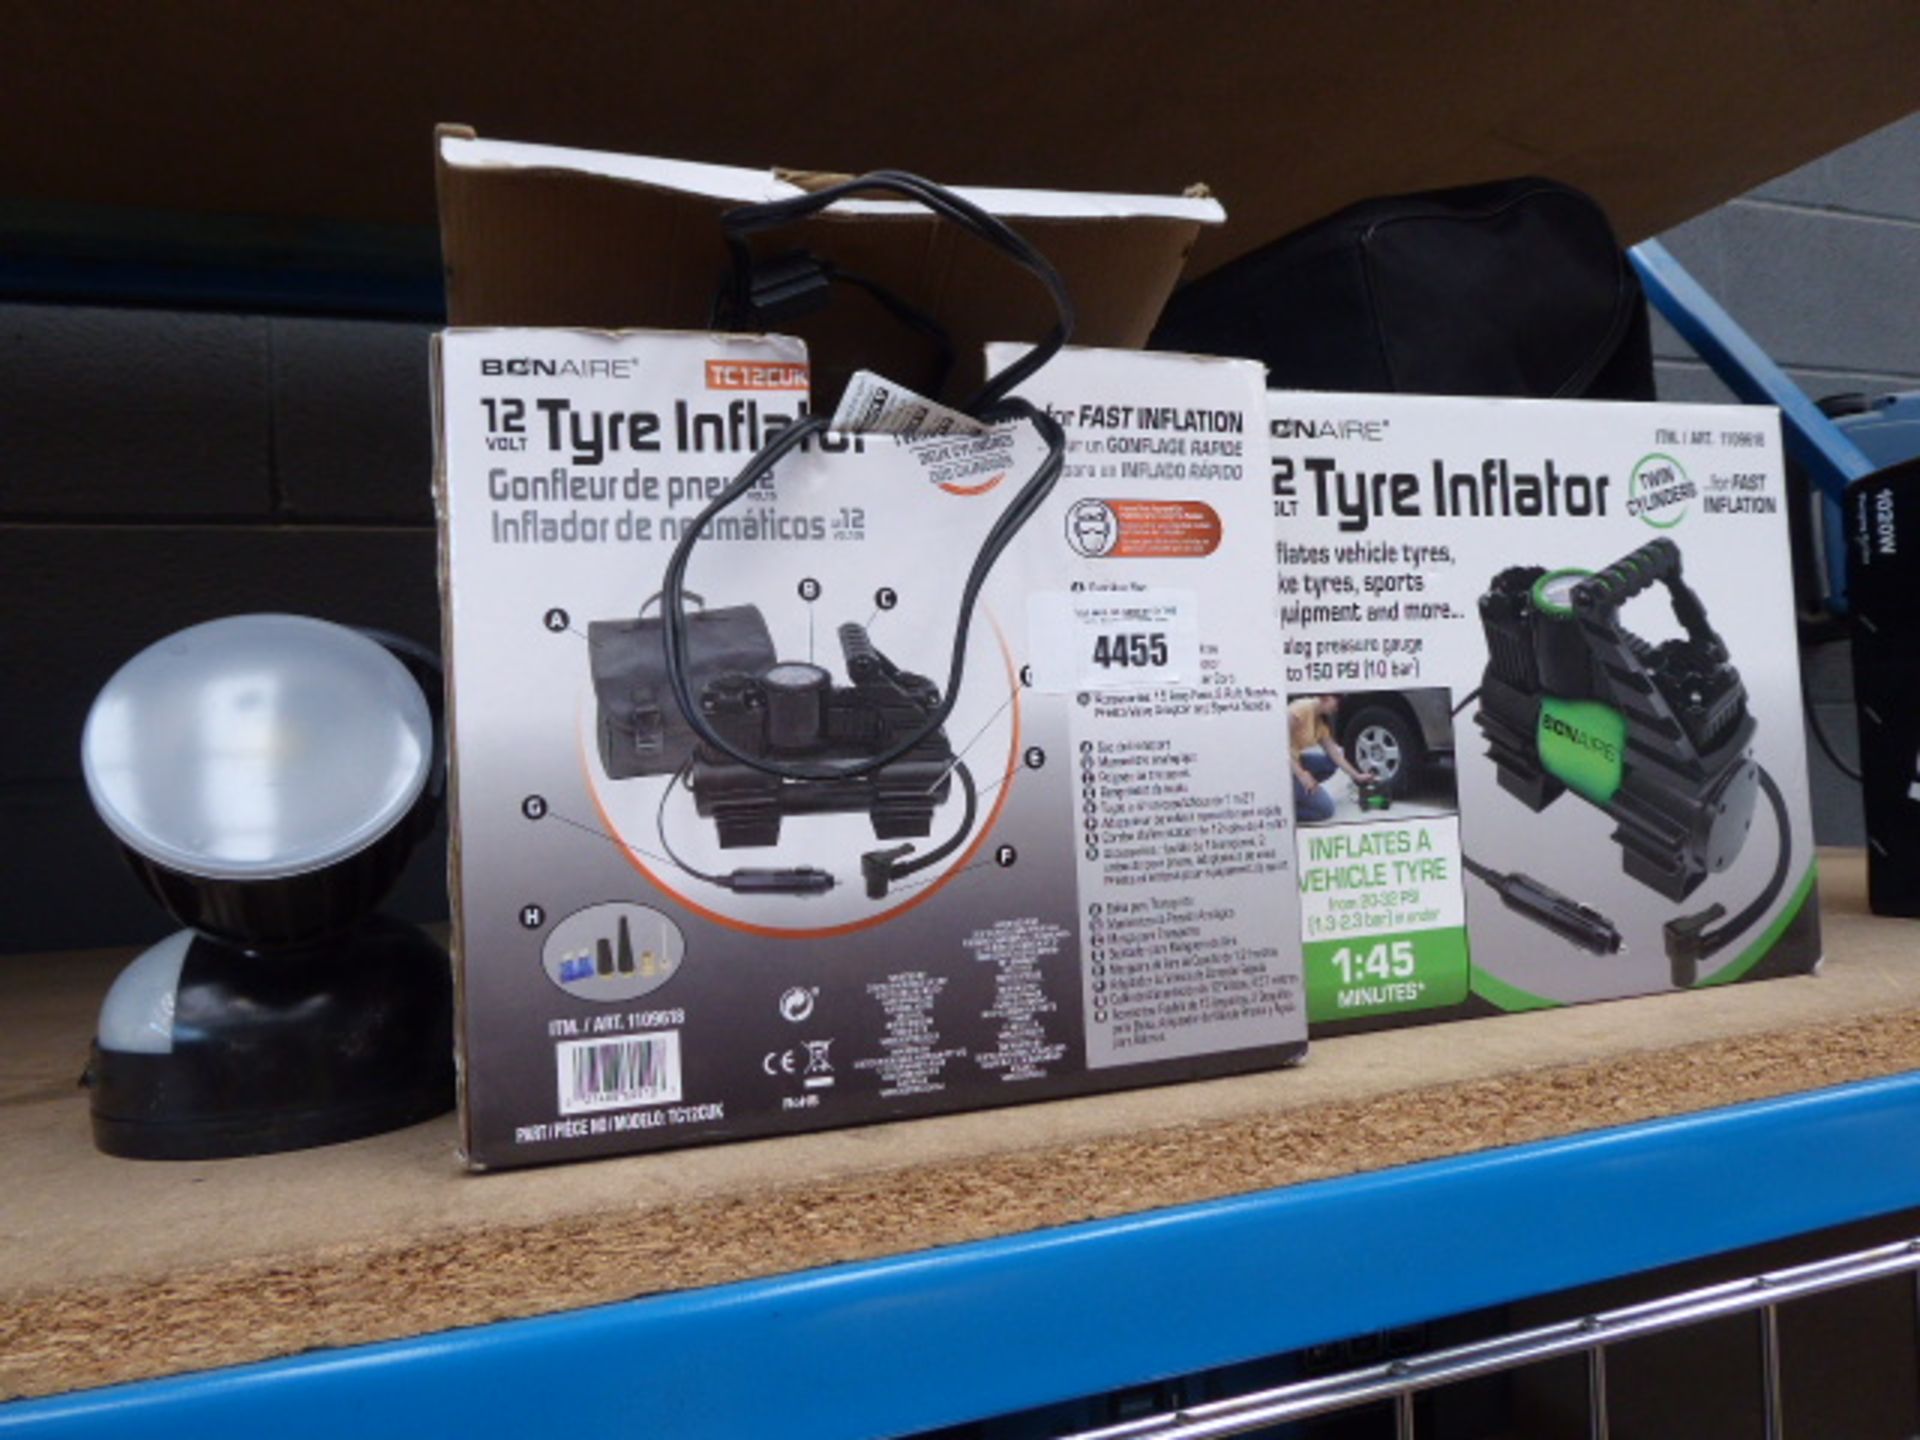 3 boxed and 1 unboxed tyre inflator and a security light